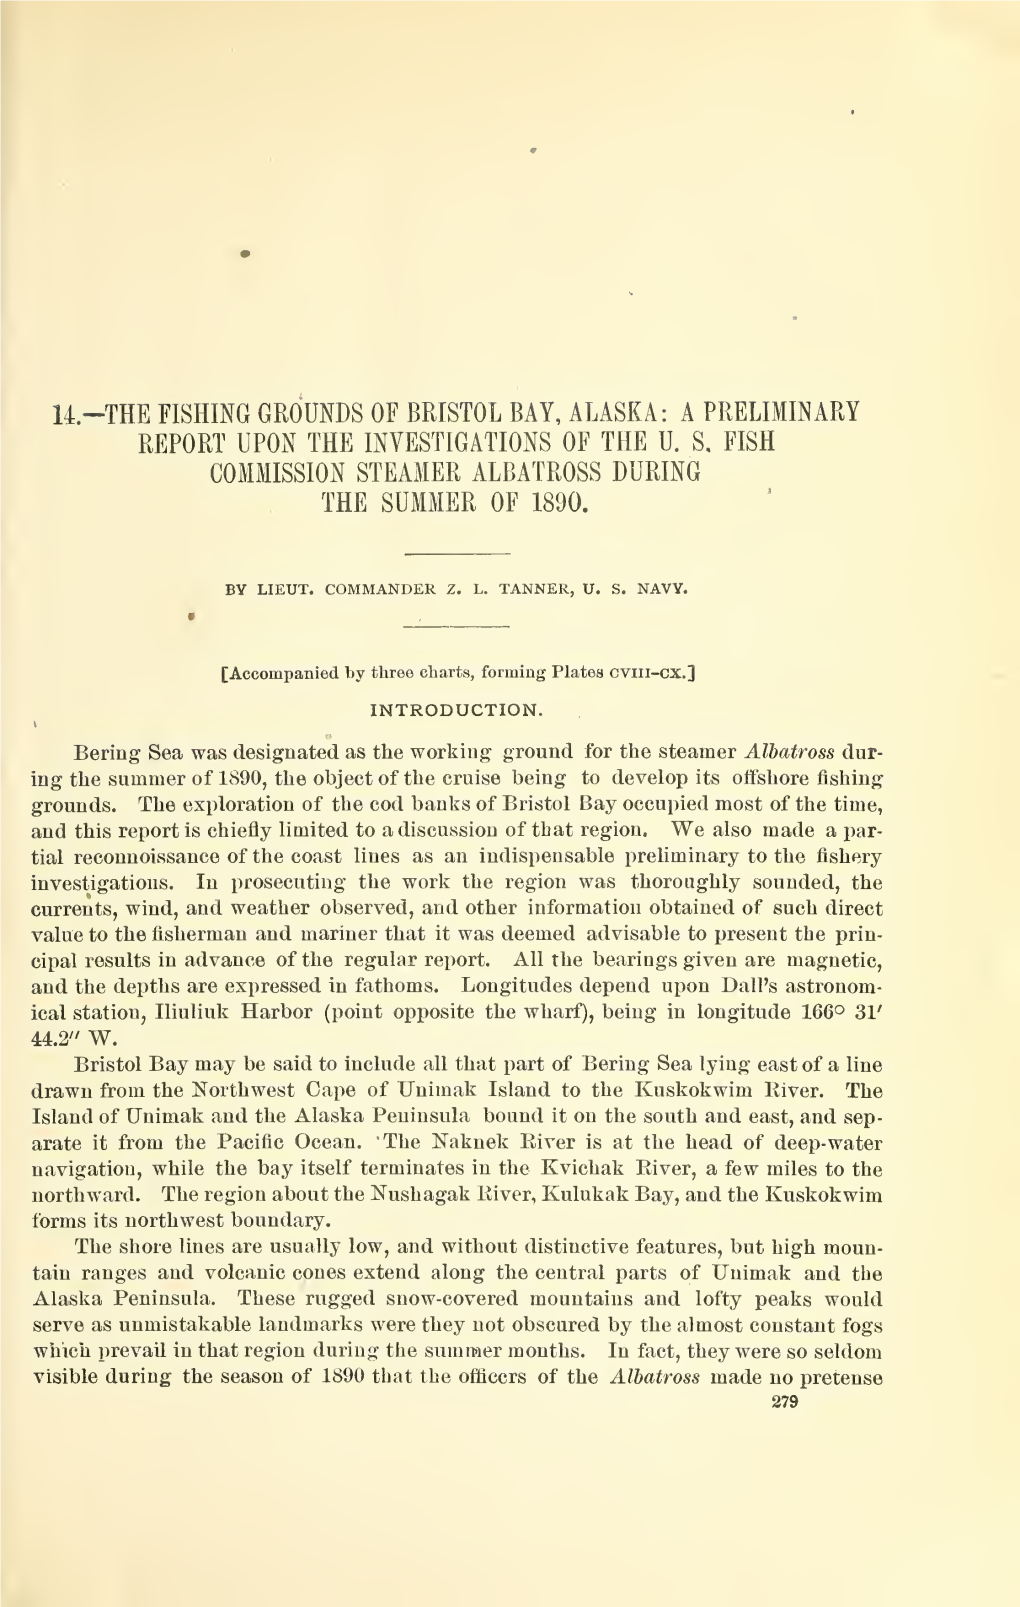 BULLETIN of the UNITED STATES FISH COMMISSION of Using Them As Landmarks